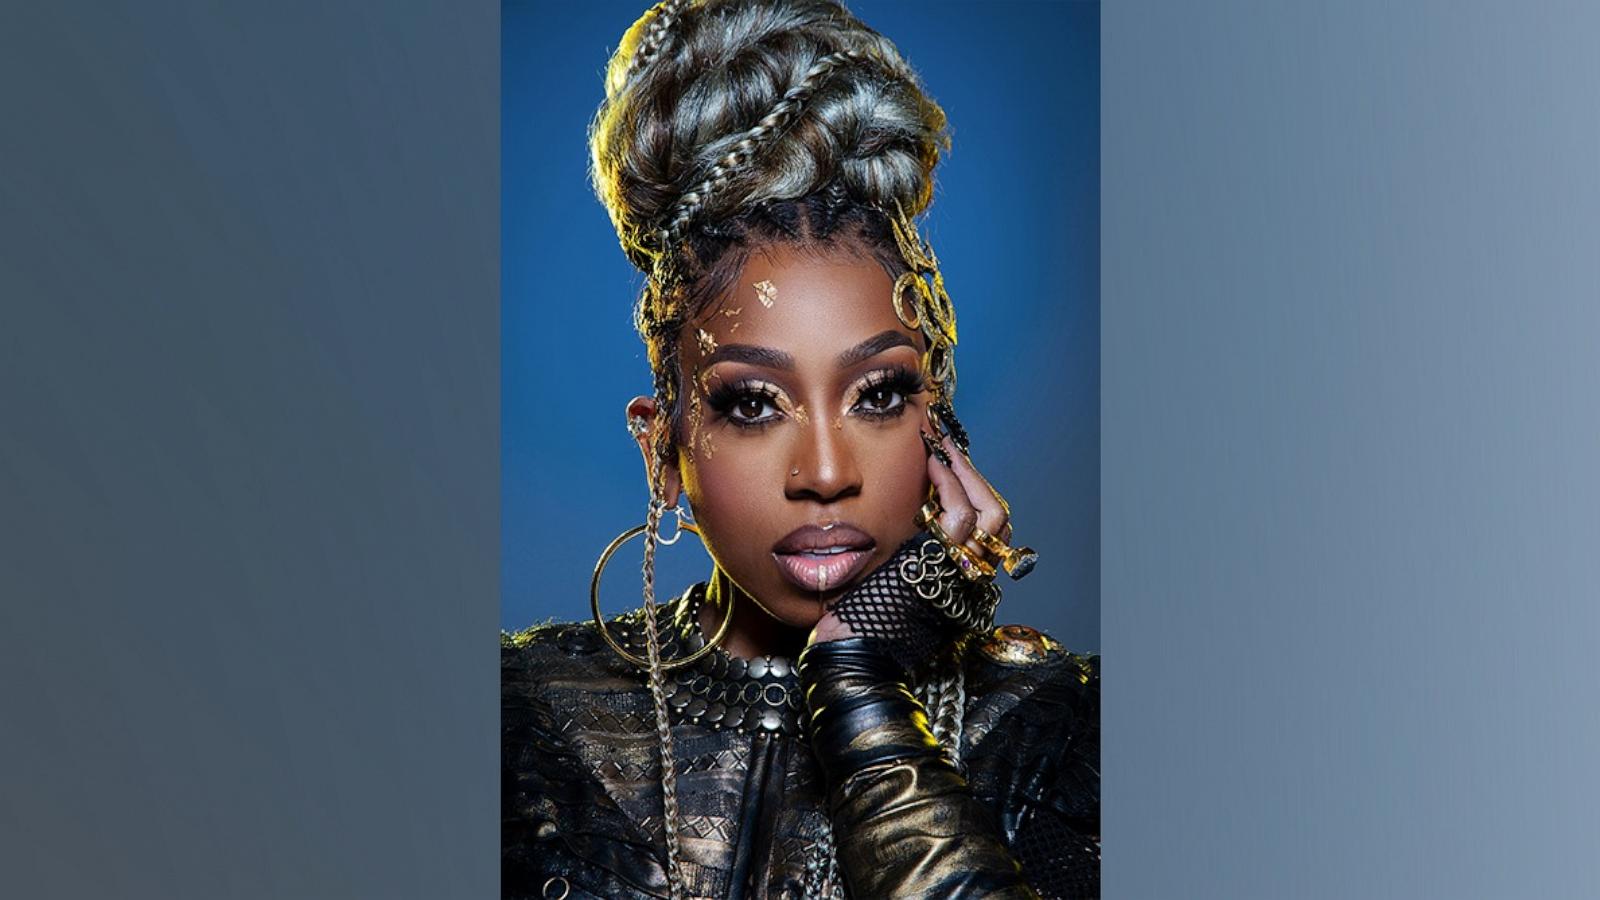 PHOTO: Missy Elliott has announced her first headline tour, the Out of This World Tour.